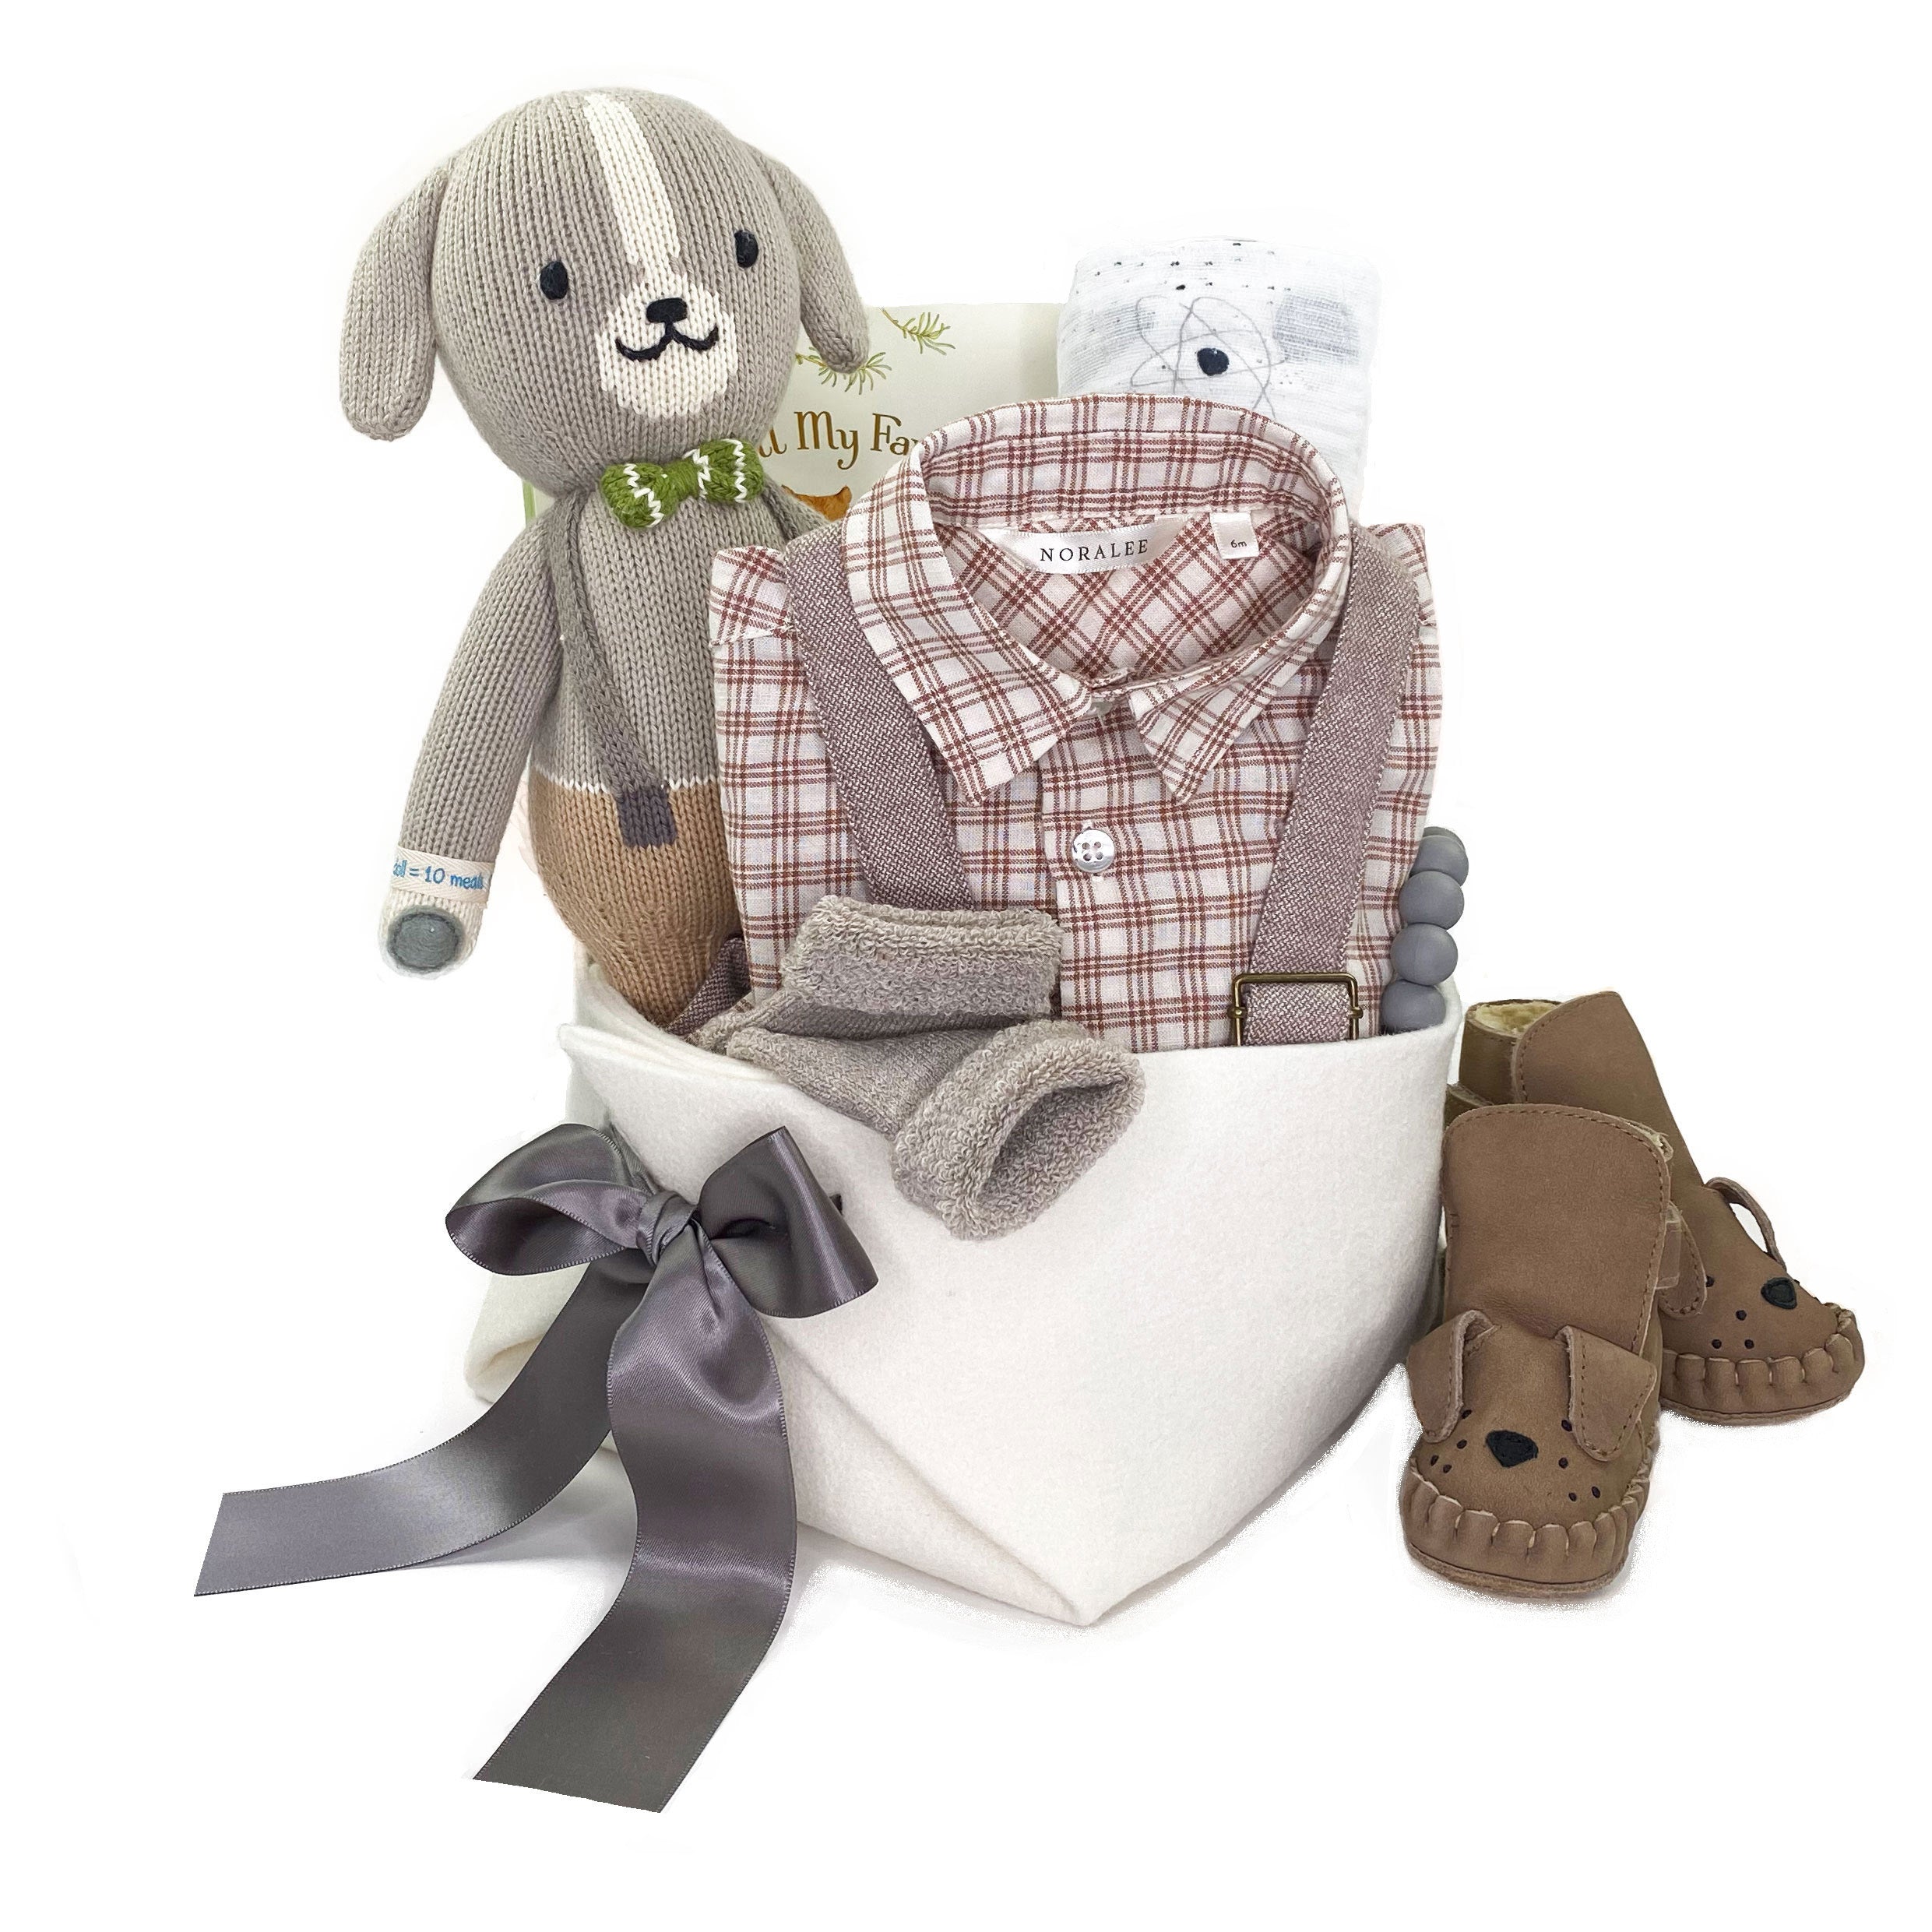 Luxury Baby Boy Gift Basket featuring Noralee suspenders pants and check shirt, leather lined boots, a doggy doll by Cuddle and Kind and curated accessories for the best baby gift at Bonjour Baby Baskets 